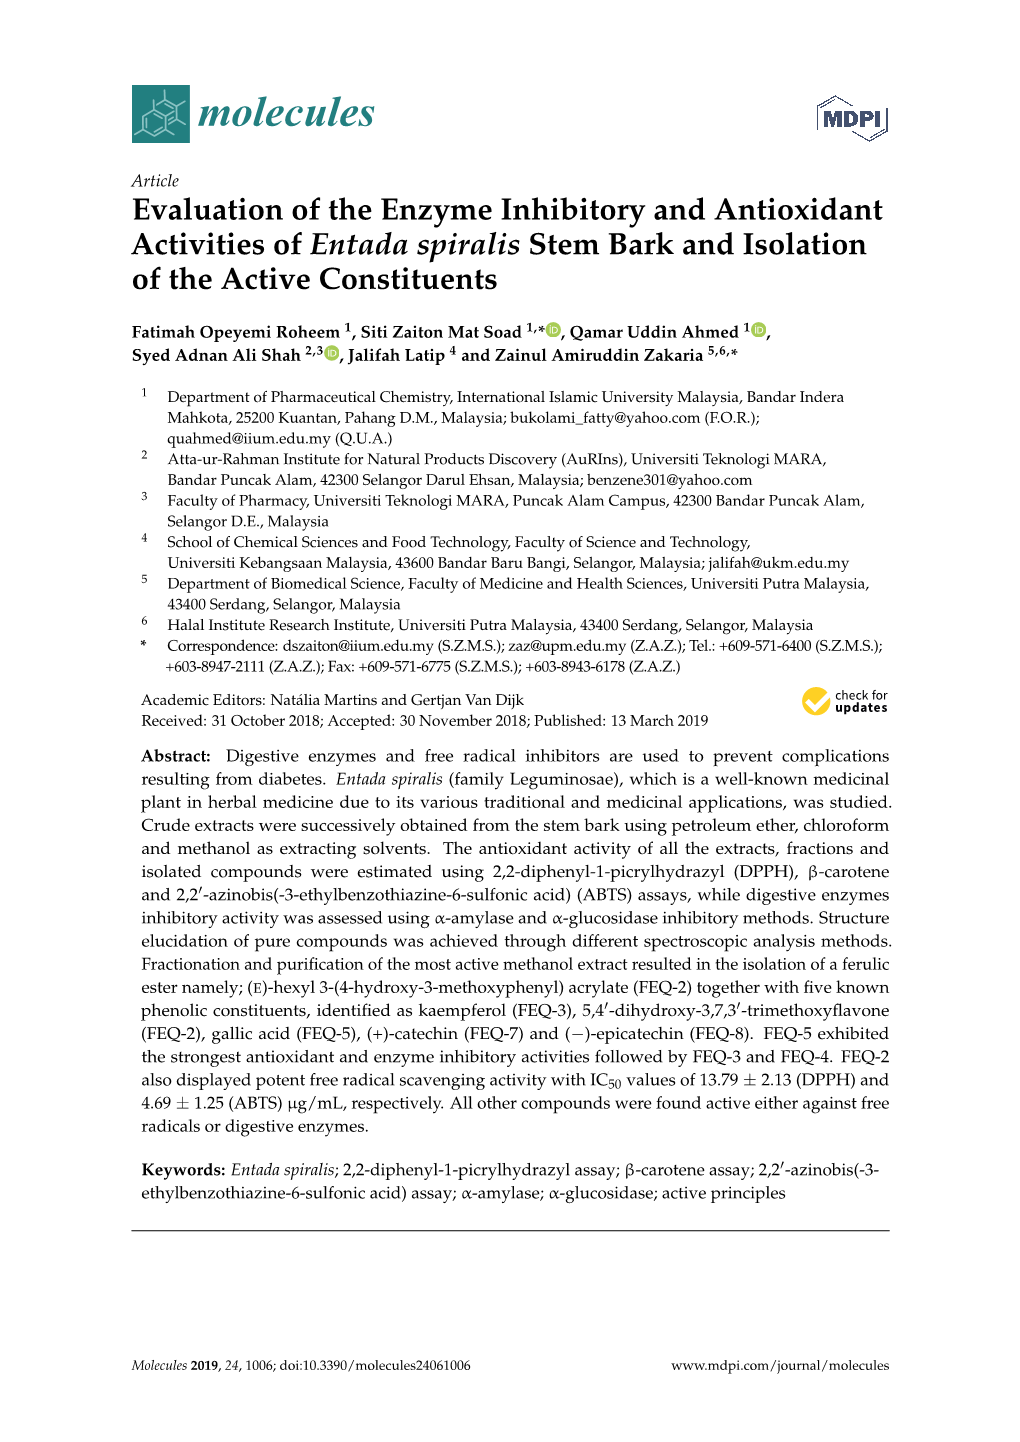 Evaluation of the Enzyme Inhibitory and Antioxidant Activities of Entada Spiralis Stem Bark and Isolation of the Active Constituents